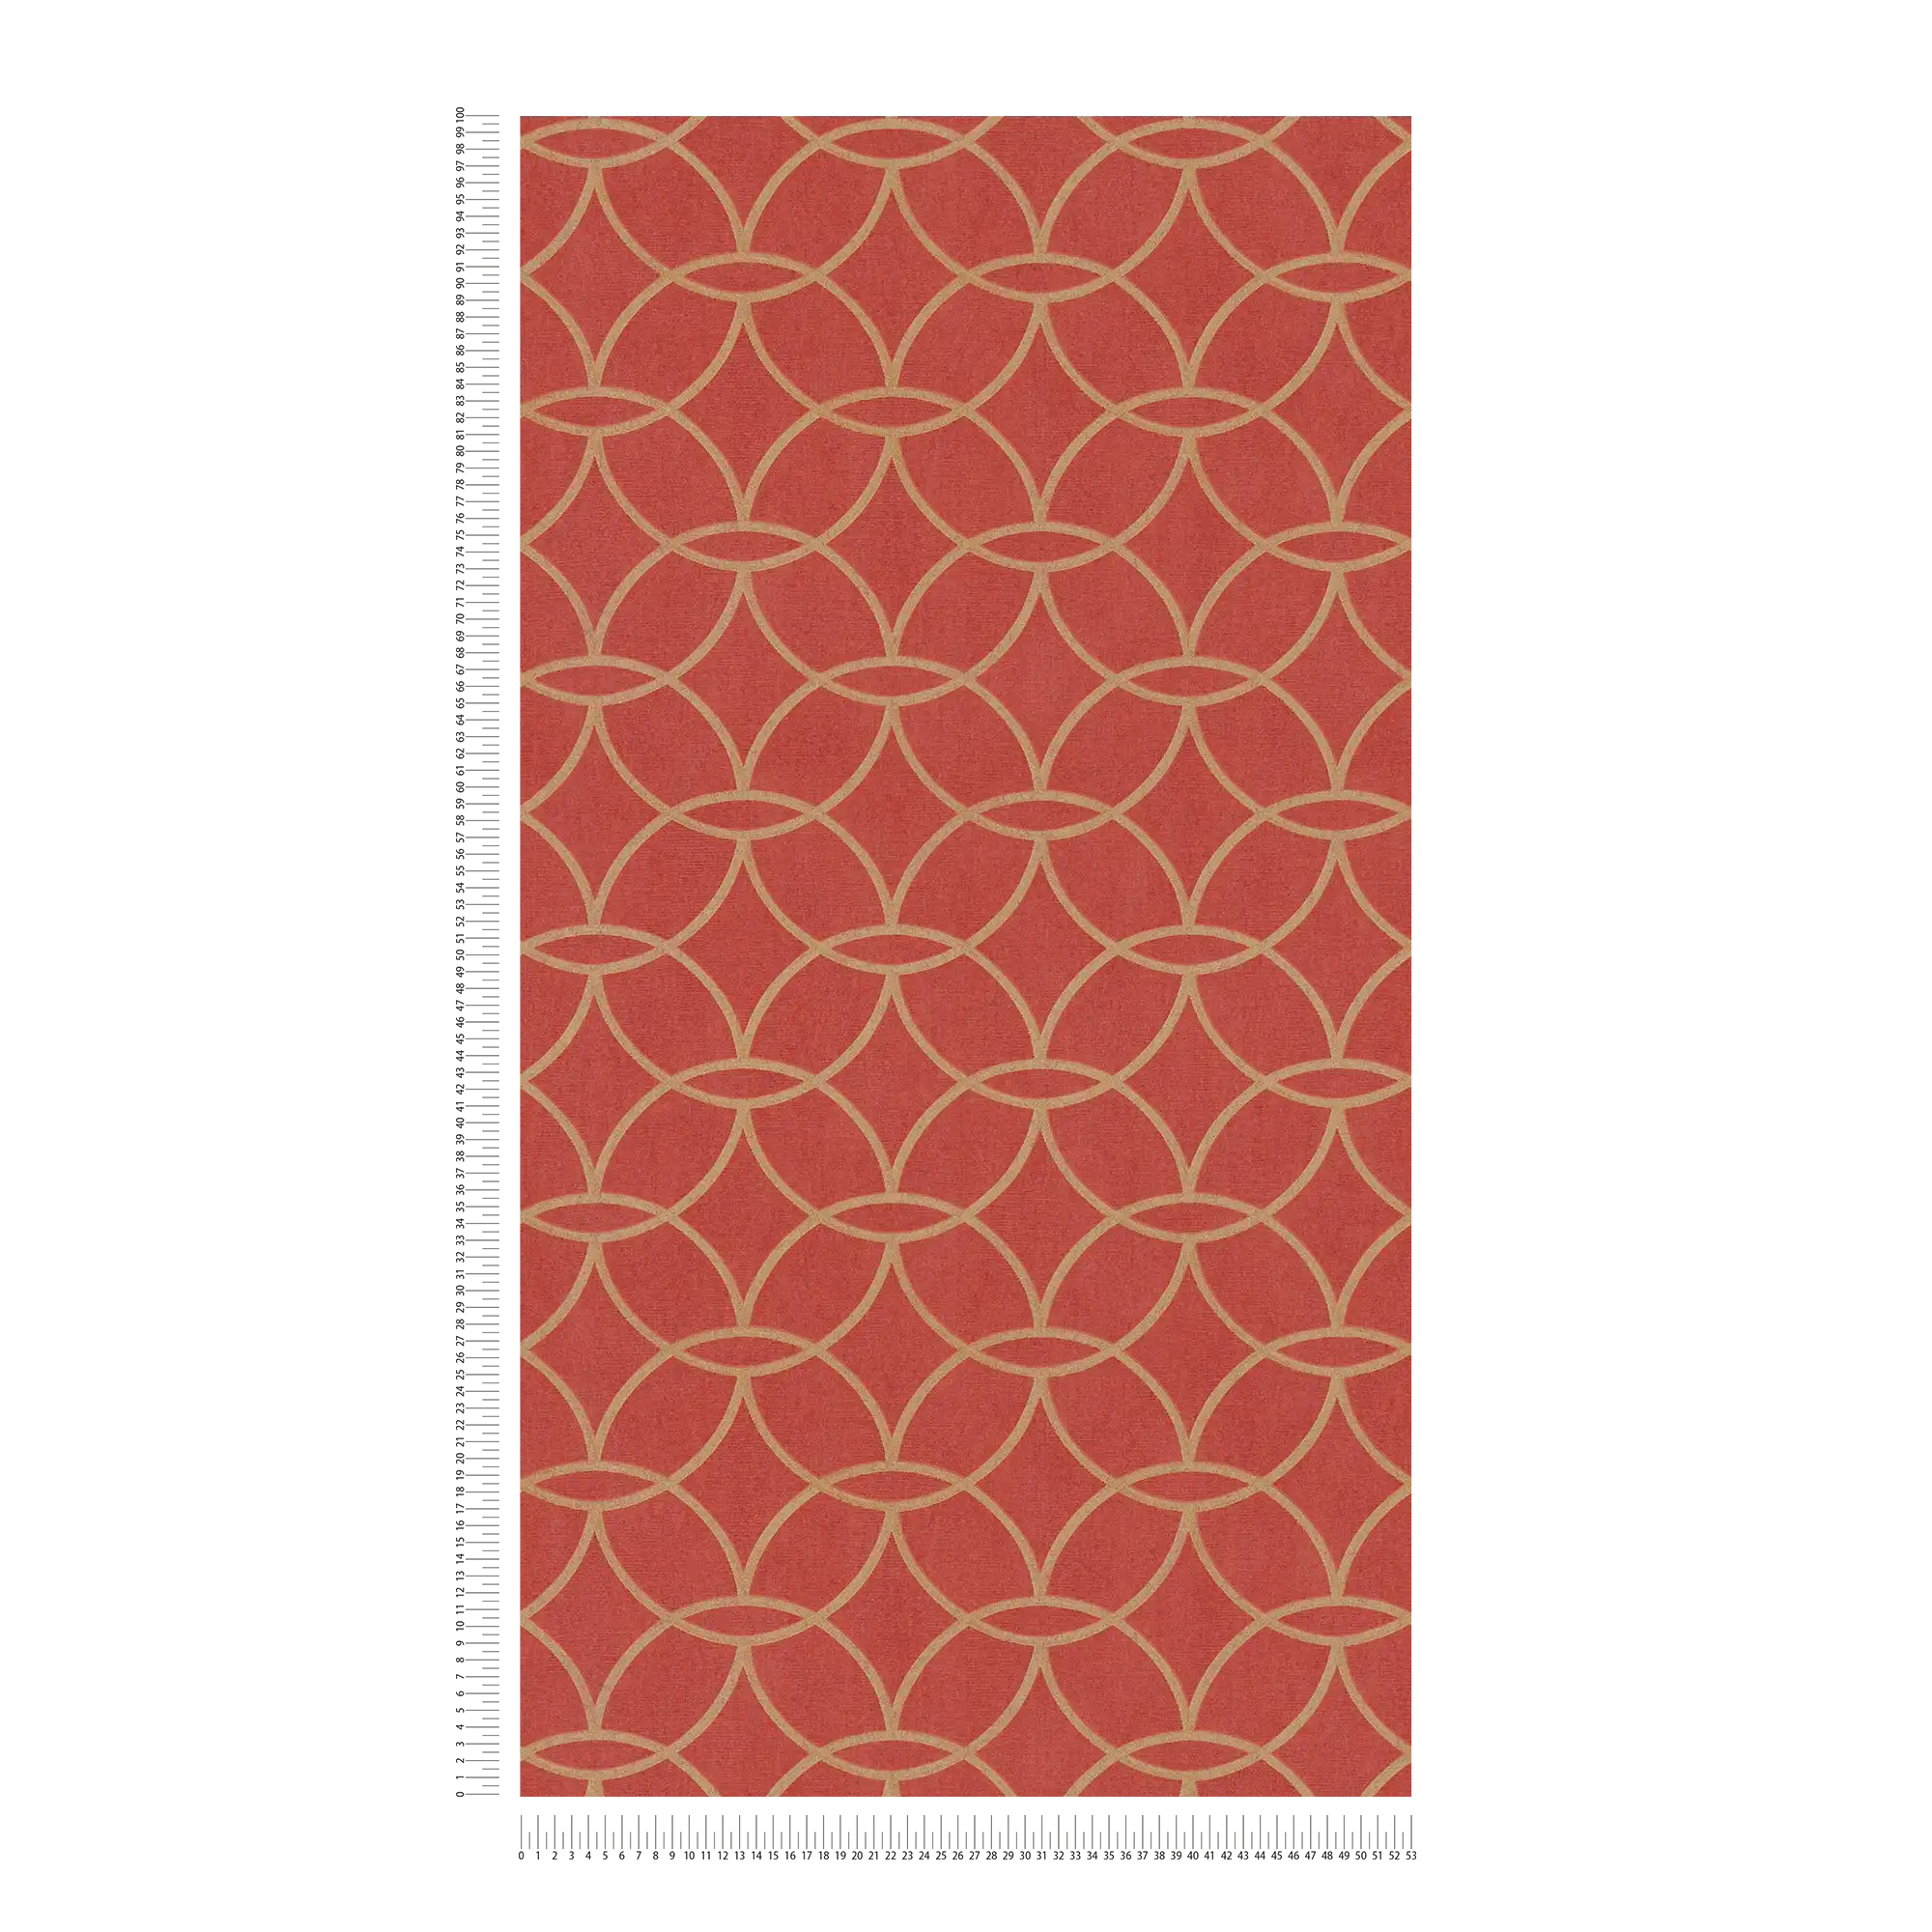             Non-woven wallpaper geometric gold pattern & shimmer effect - red, gold
        